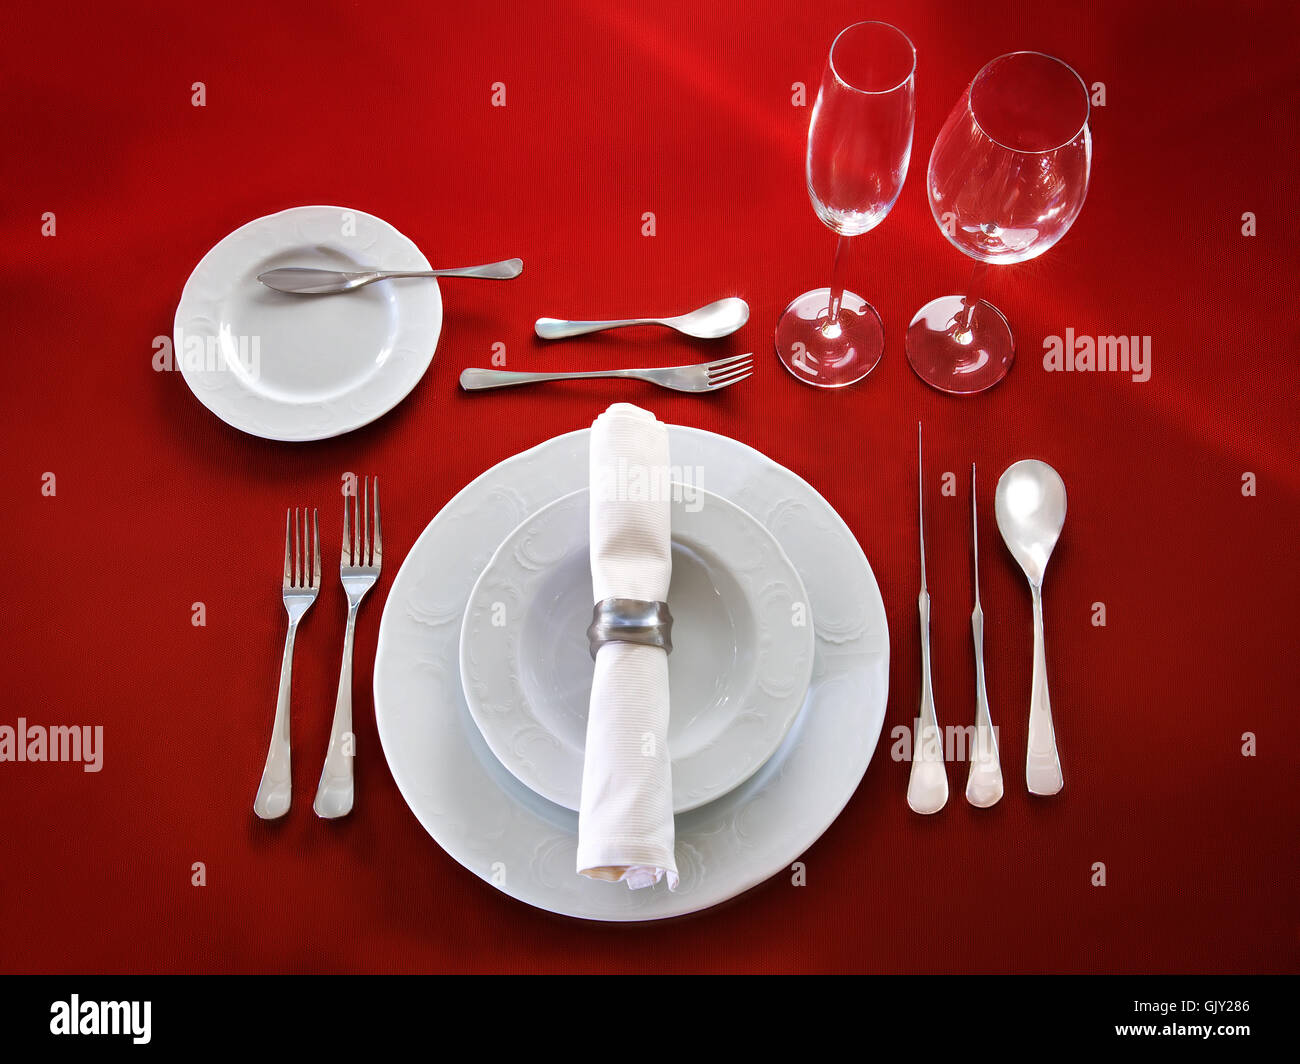 Perfect table setting on red cloth background Stock Photo